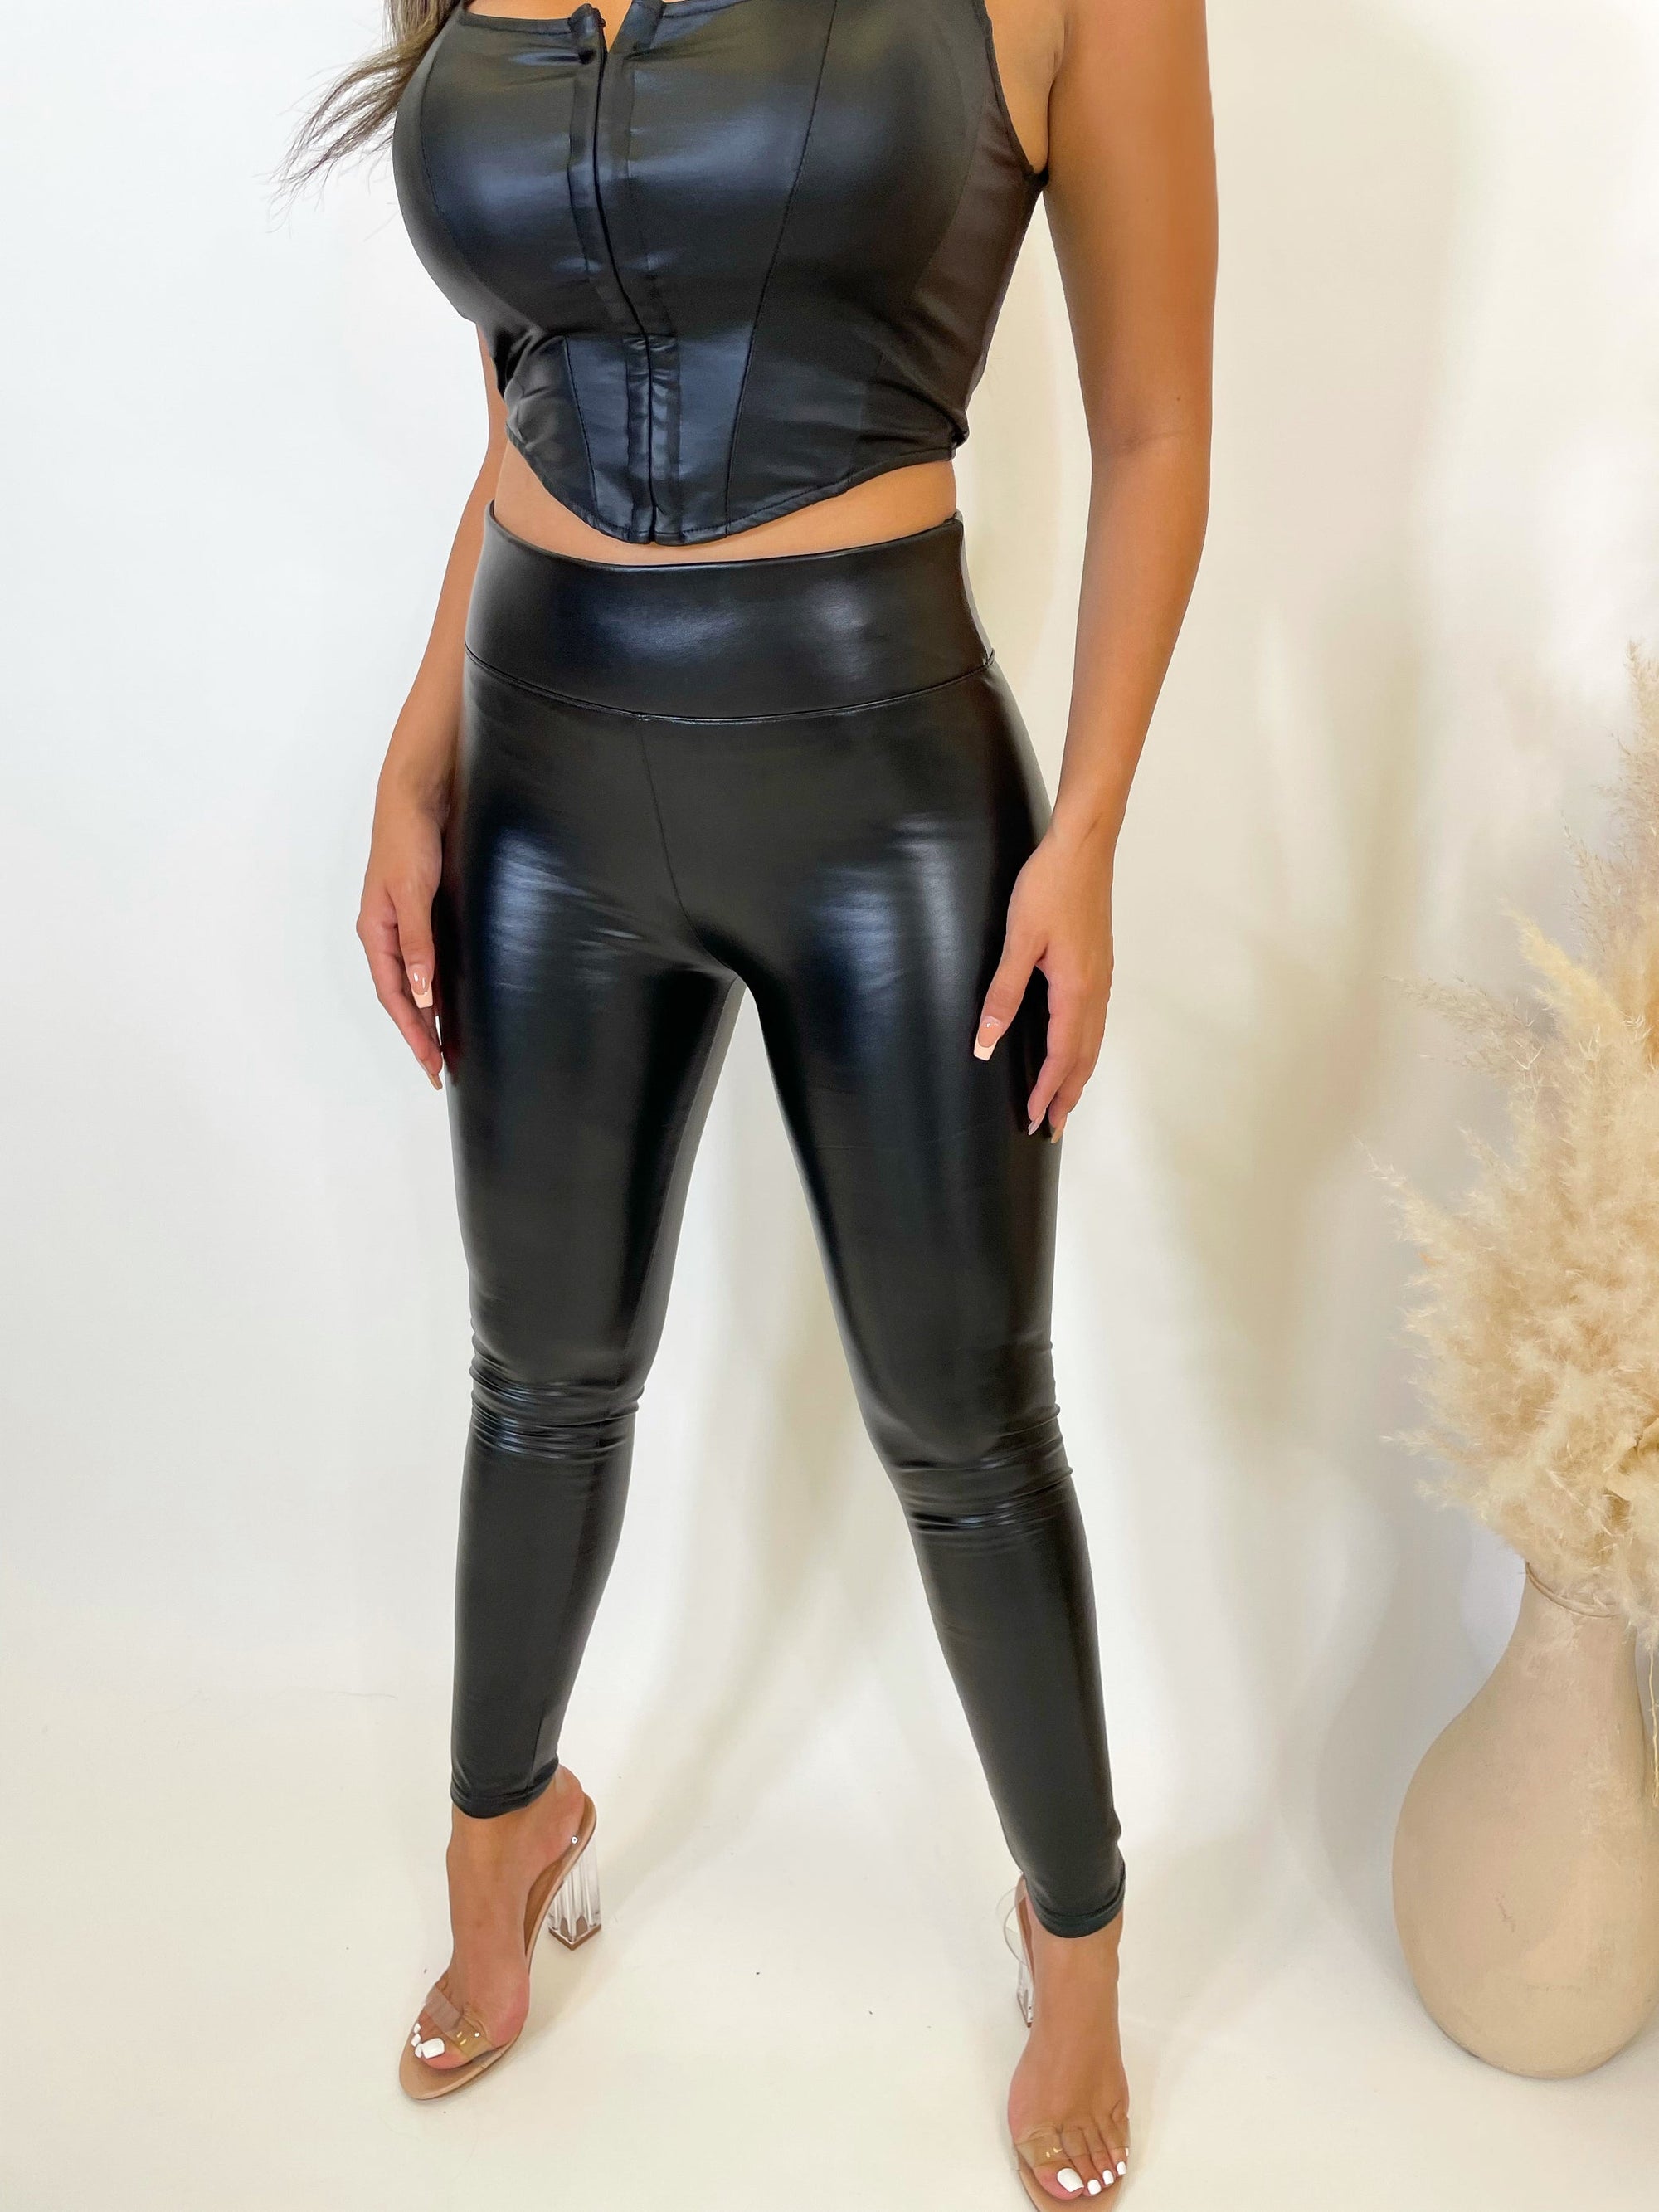 Tonia Women Faux Leather Pants  Leather trousers outfit, Leather pants  outfit, Black leather pants